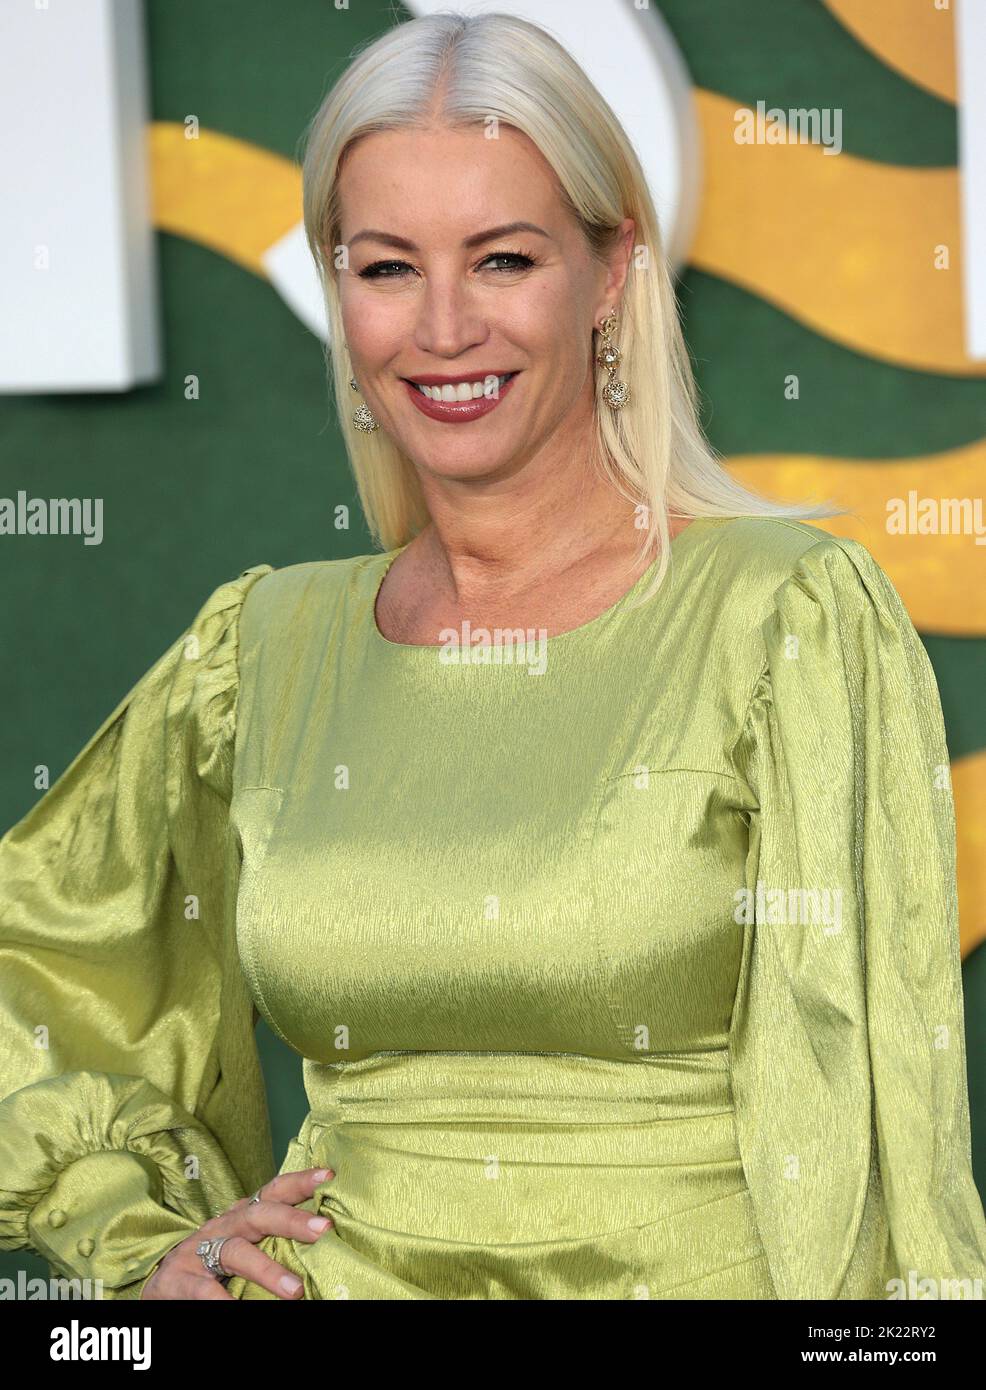 Sep 21, 2022 - London, England, UK - Denise Van Outen attending Amsterdam European premiere, Odeon Luxe, Leicester Square Stock Photo